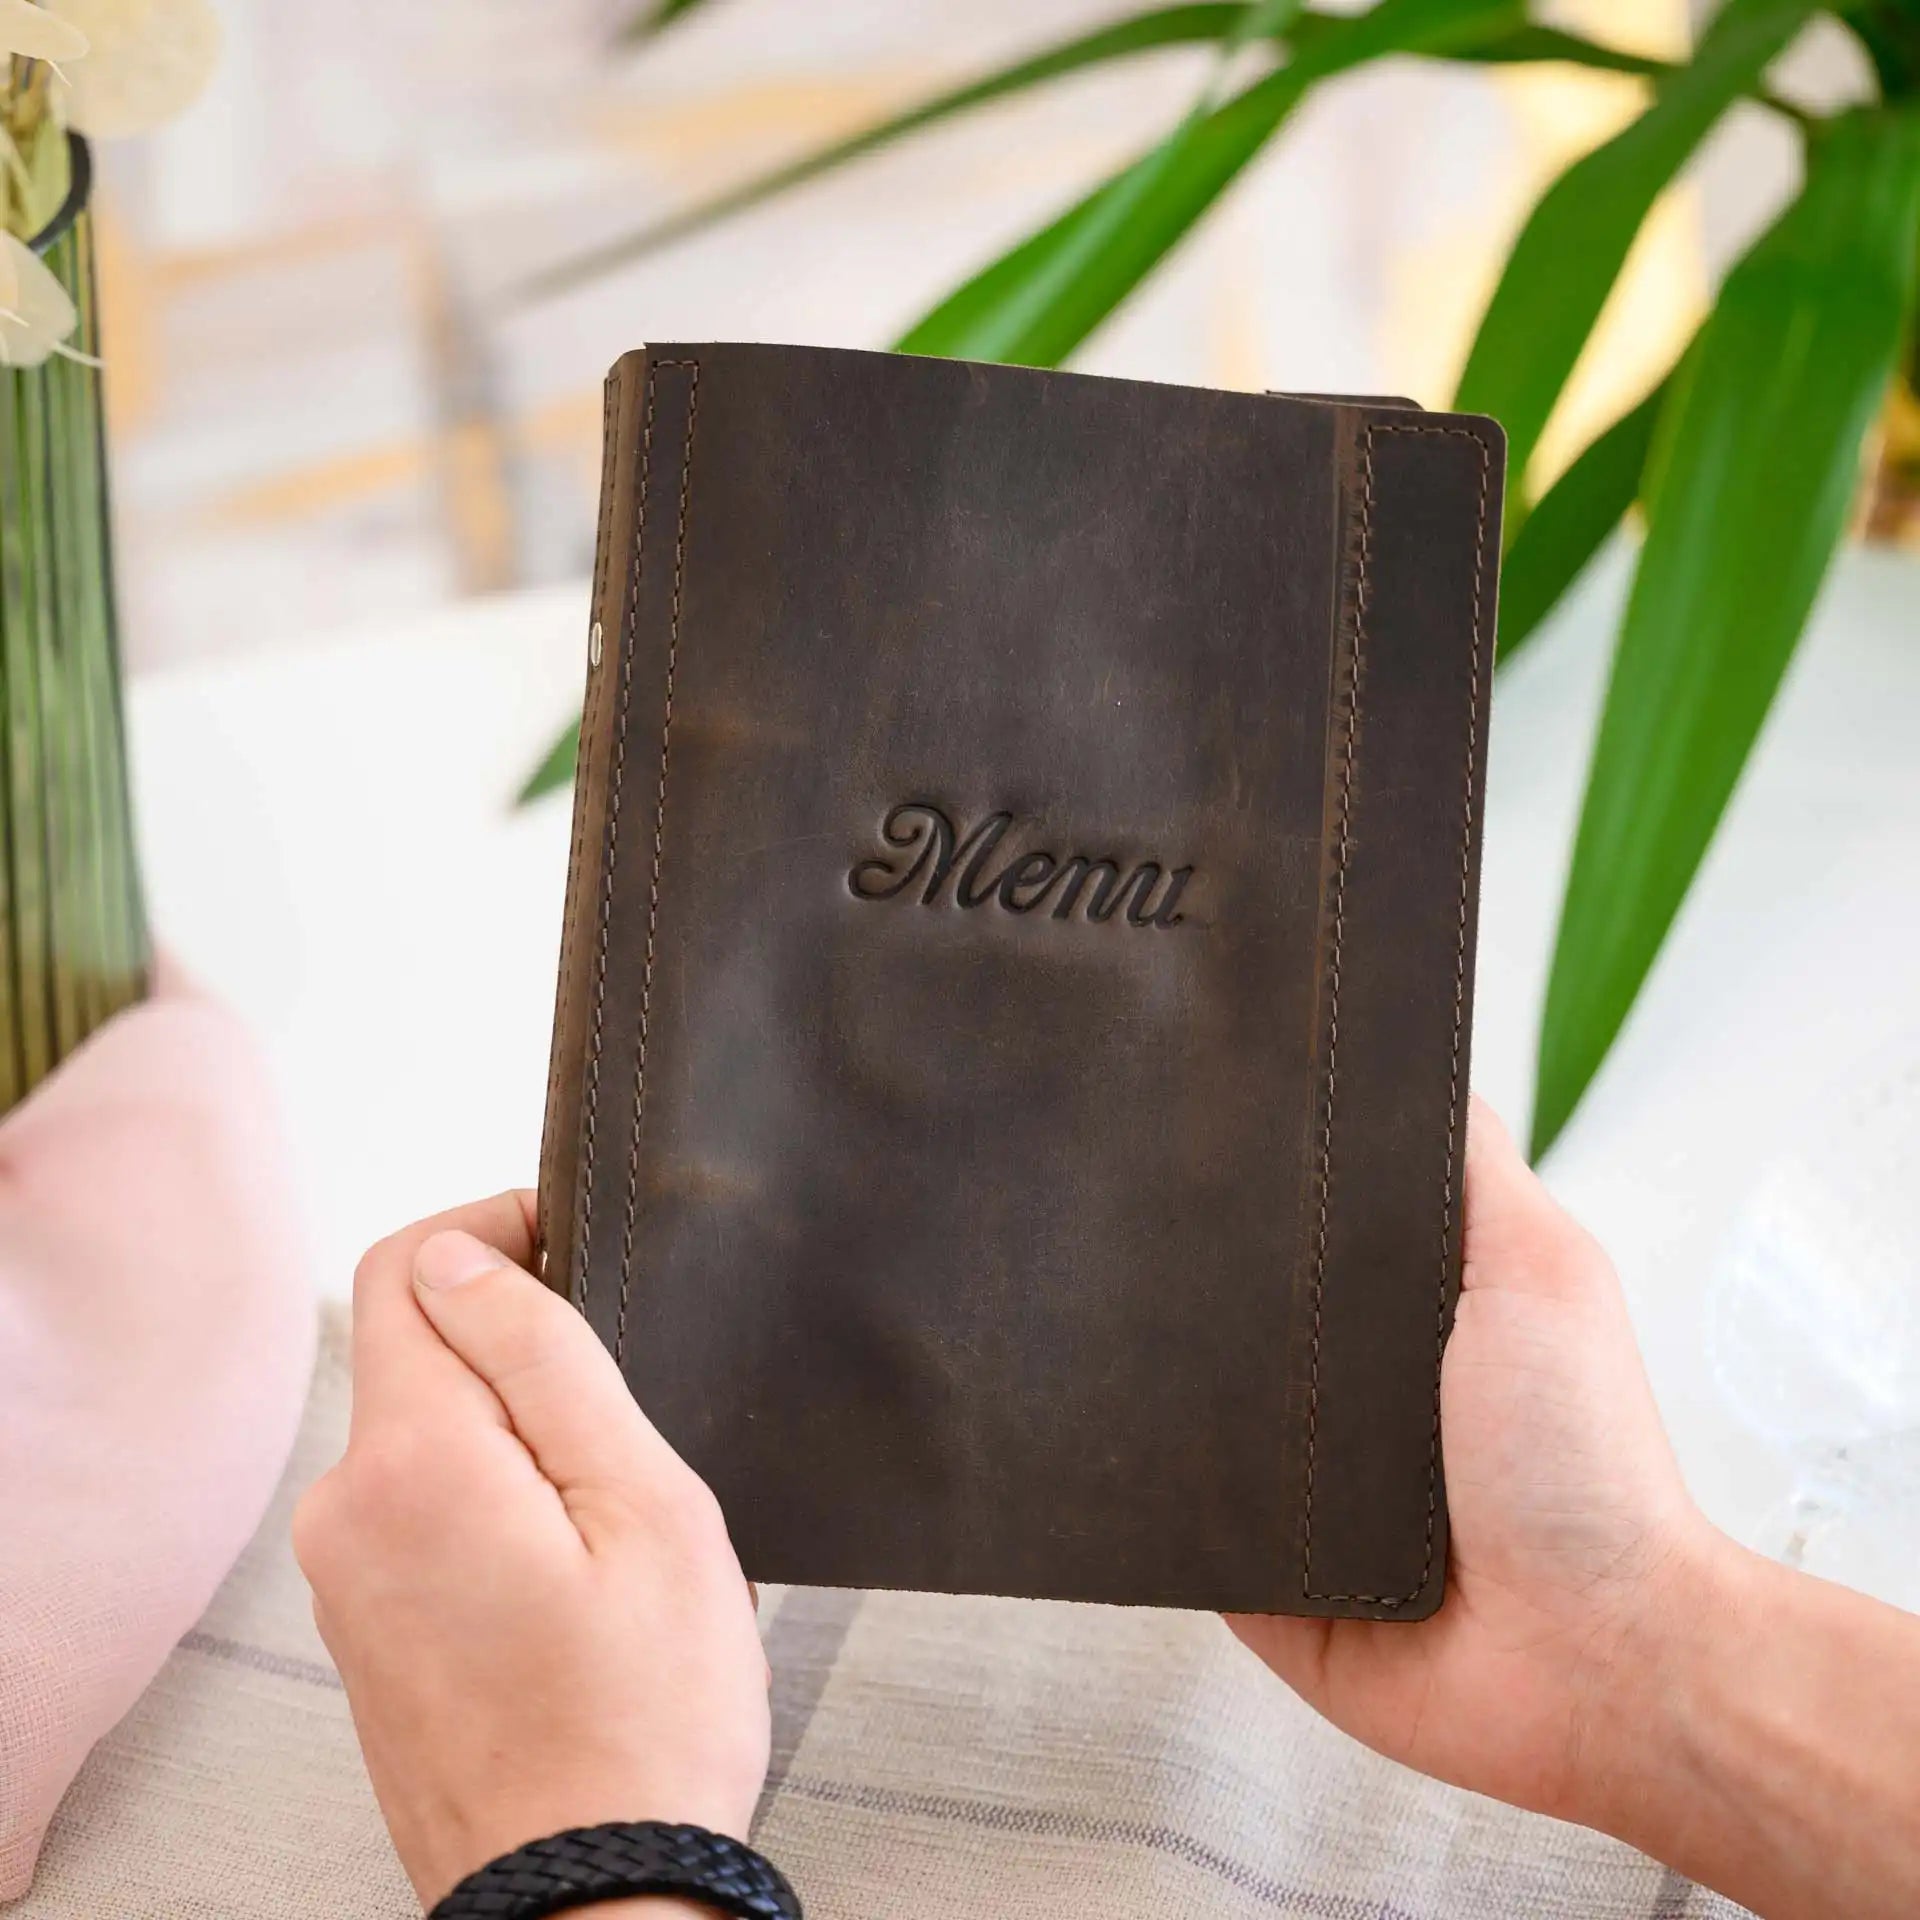 Impress guests with our custom menu holder, designed to reflect your unique brand identity.